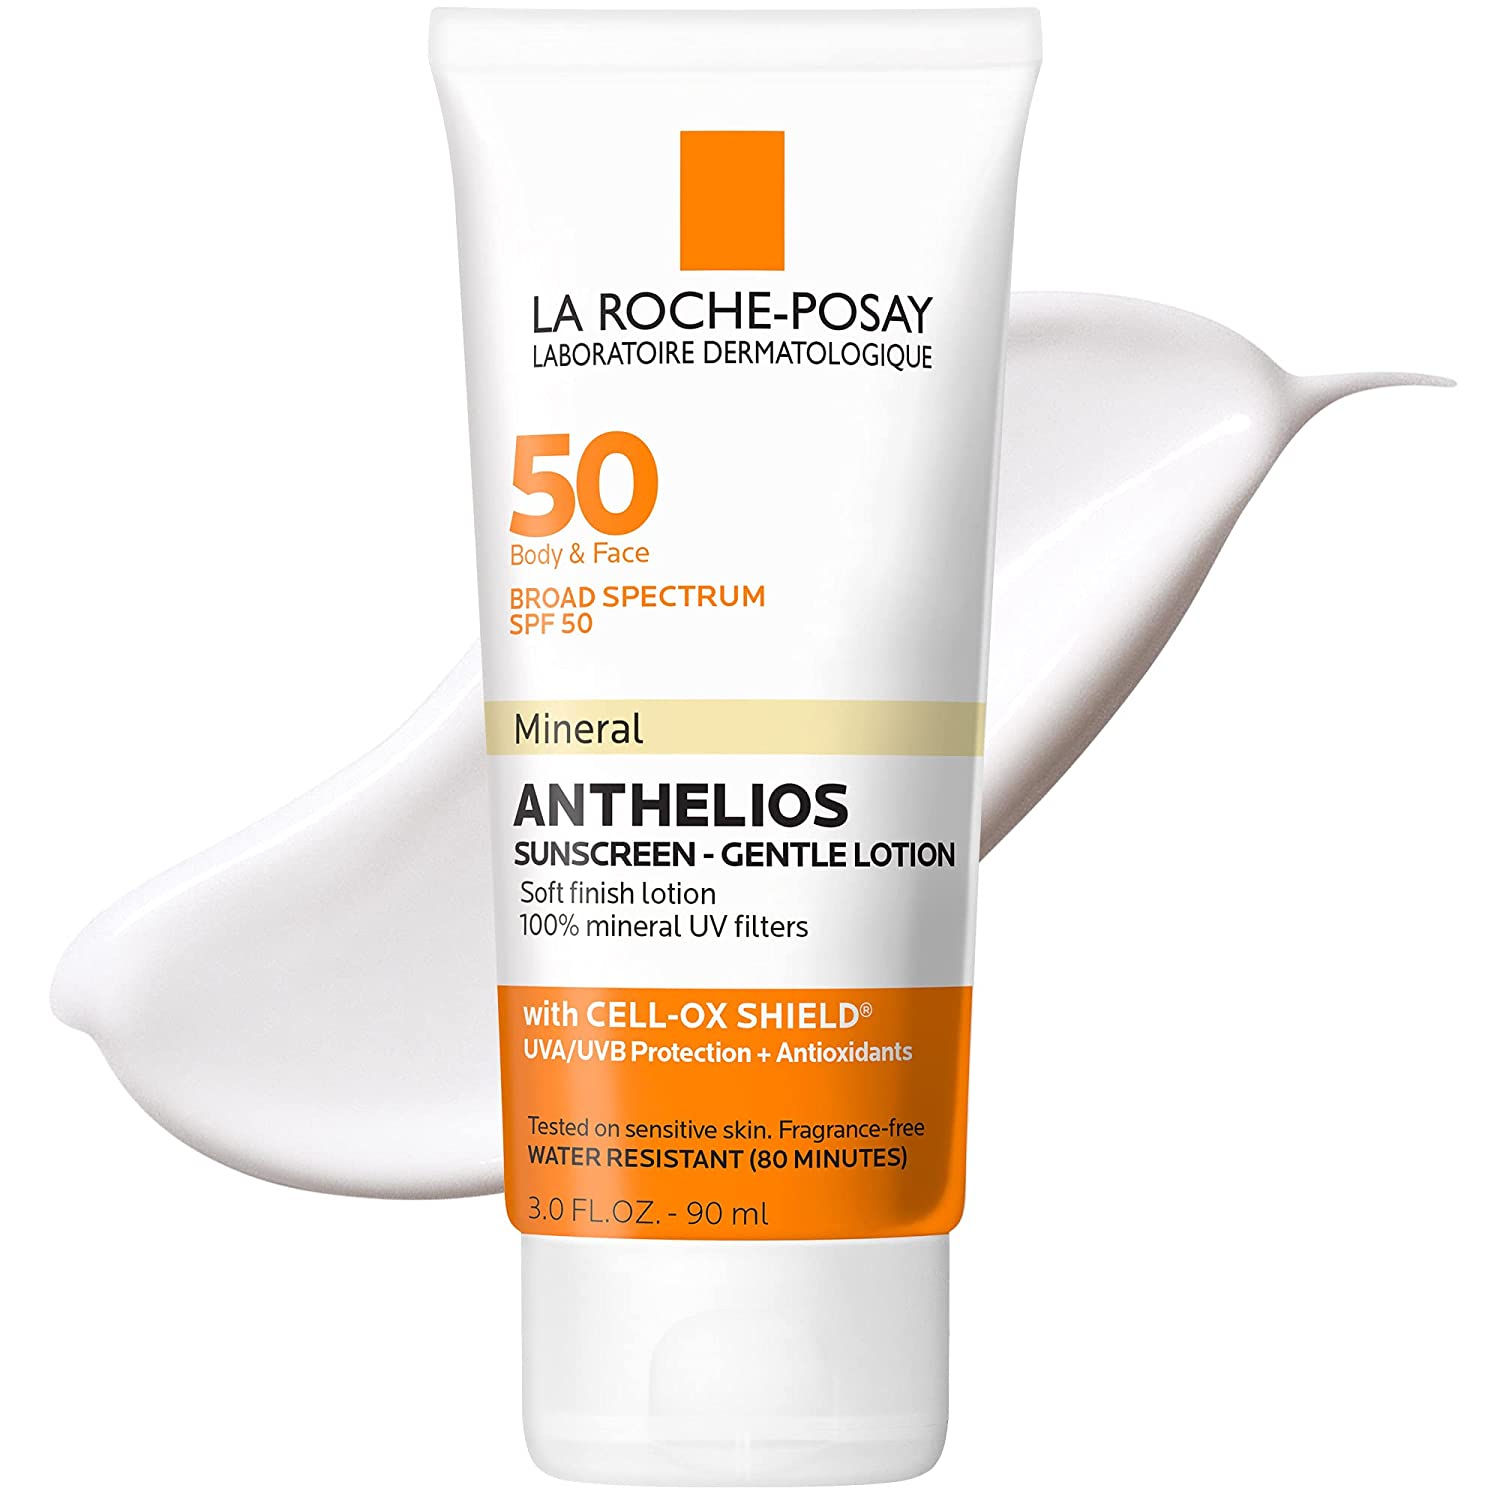 La Roche-Posay Anthelios Mineral Sunscreen Gentle Lotion Broad Spectrum SPF 50, Face and Body